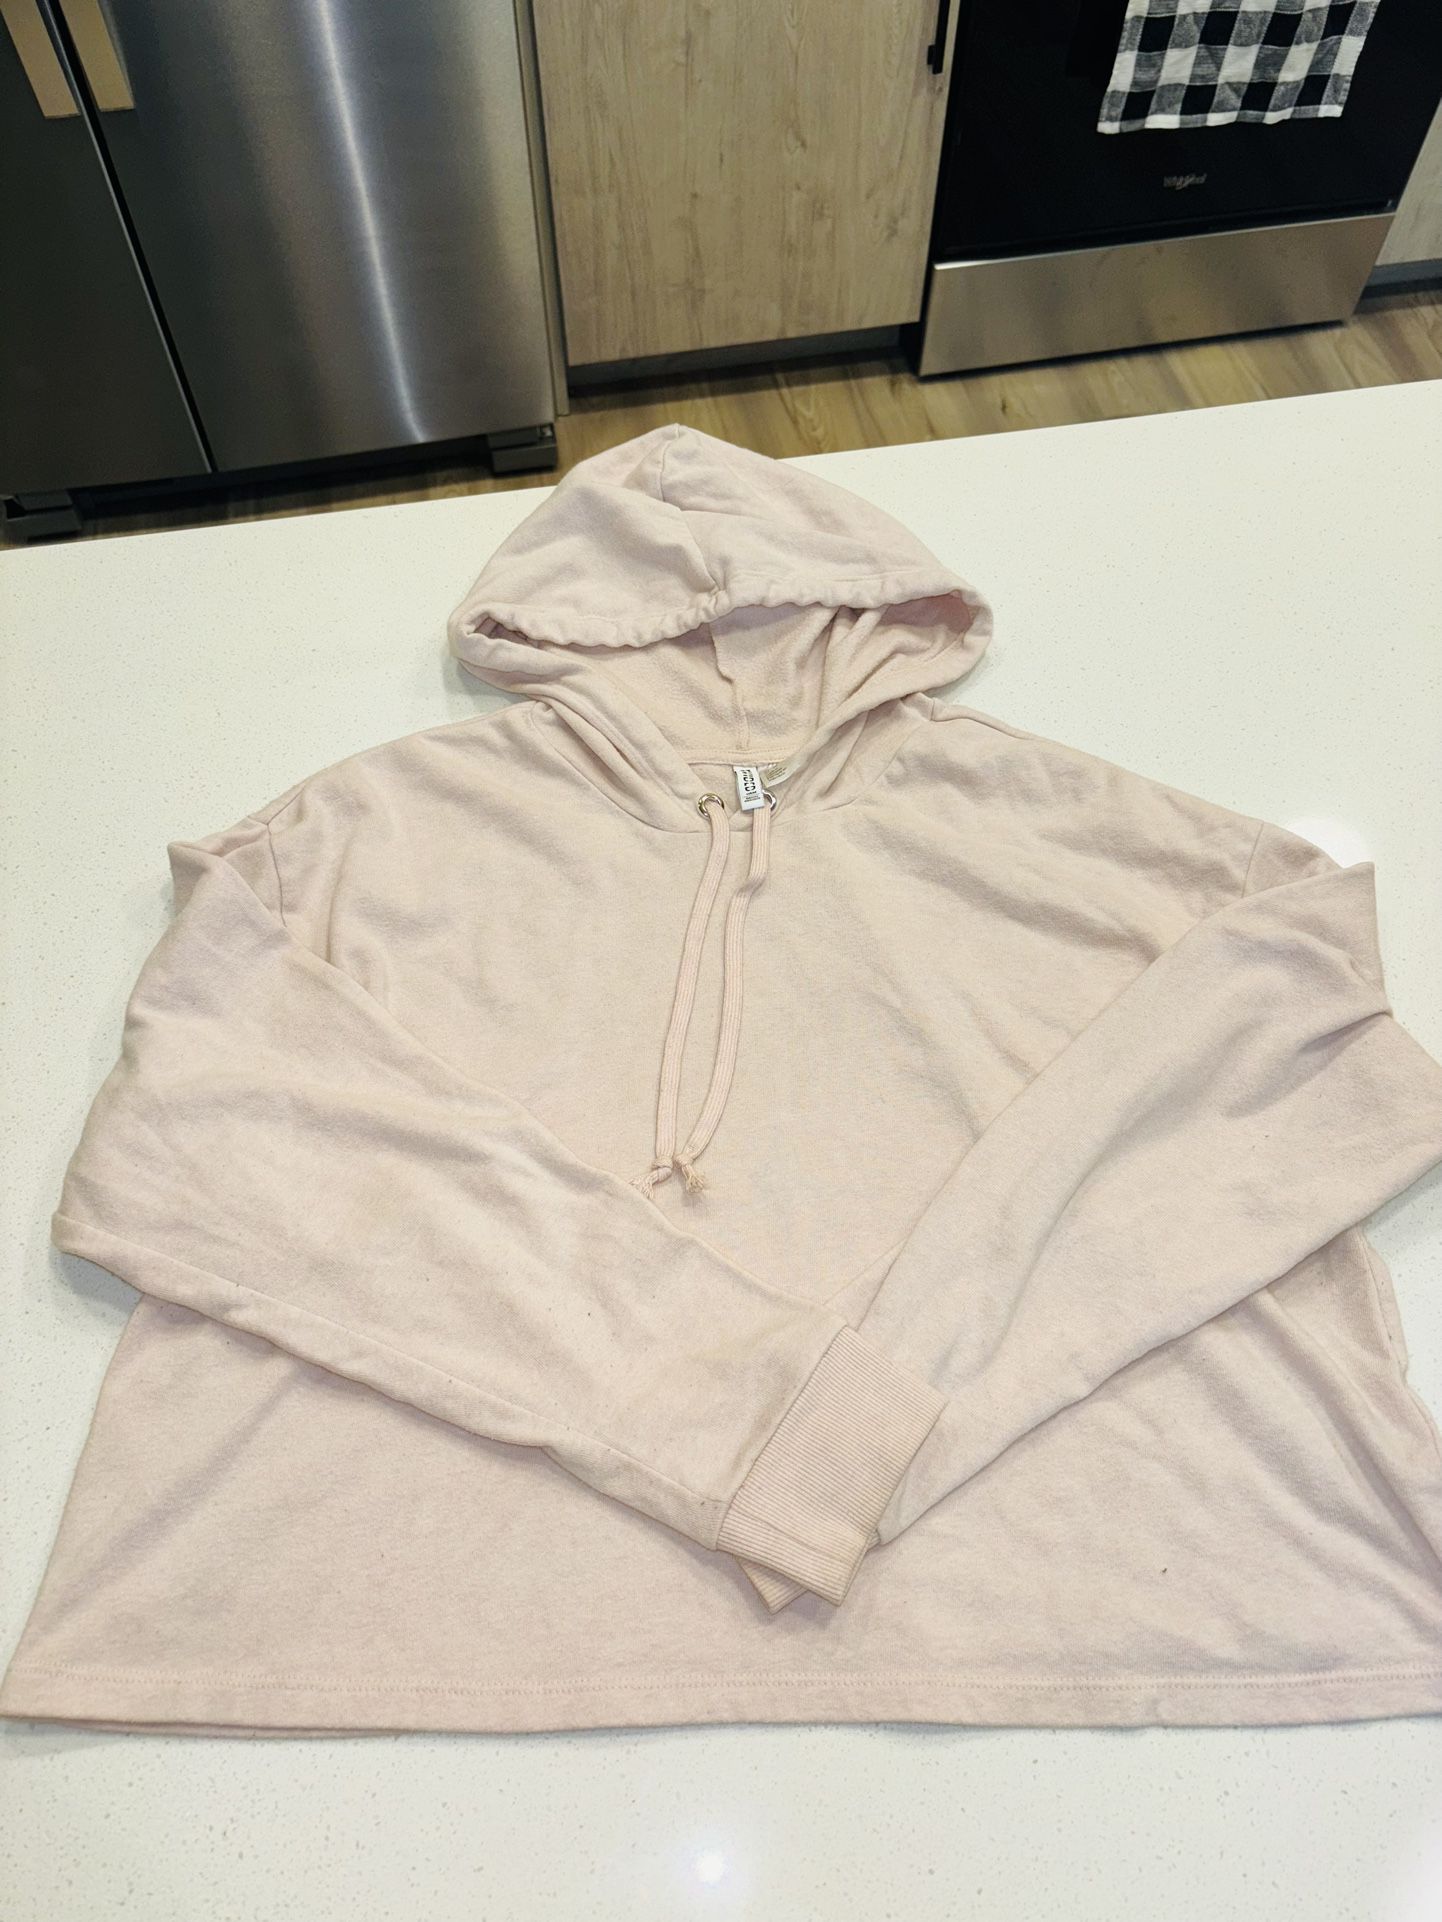 Divided Women’s Cropped long sleeve light pink hoodie shirt 